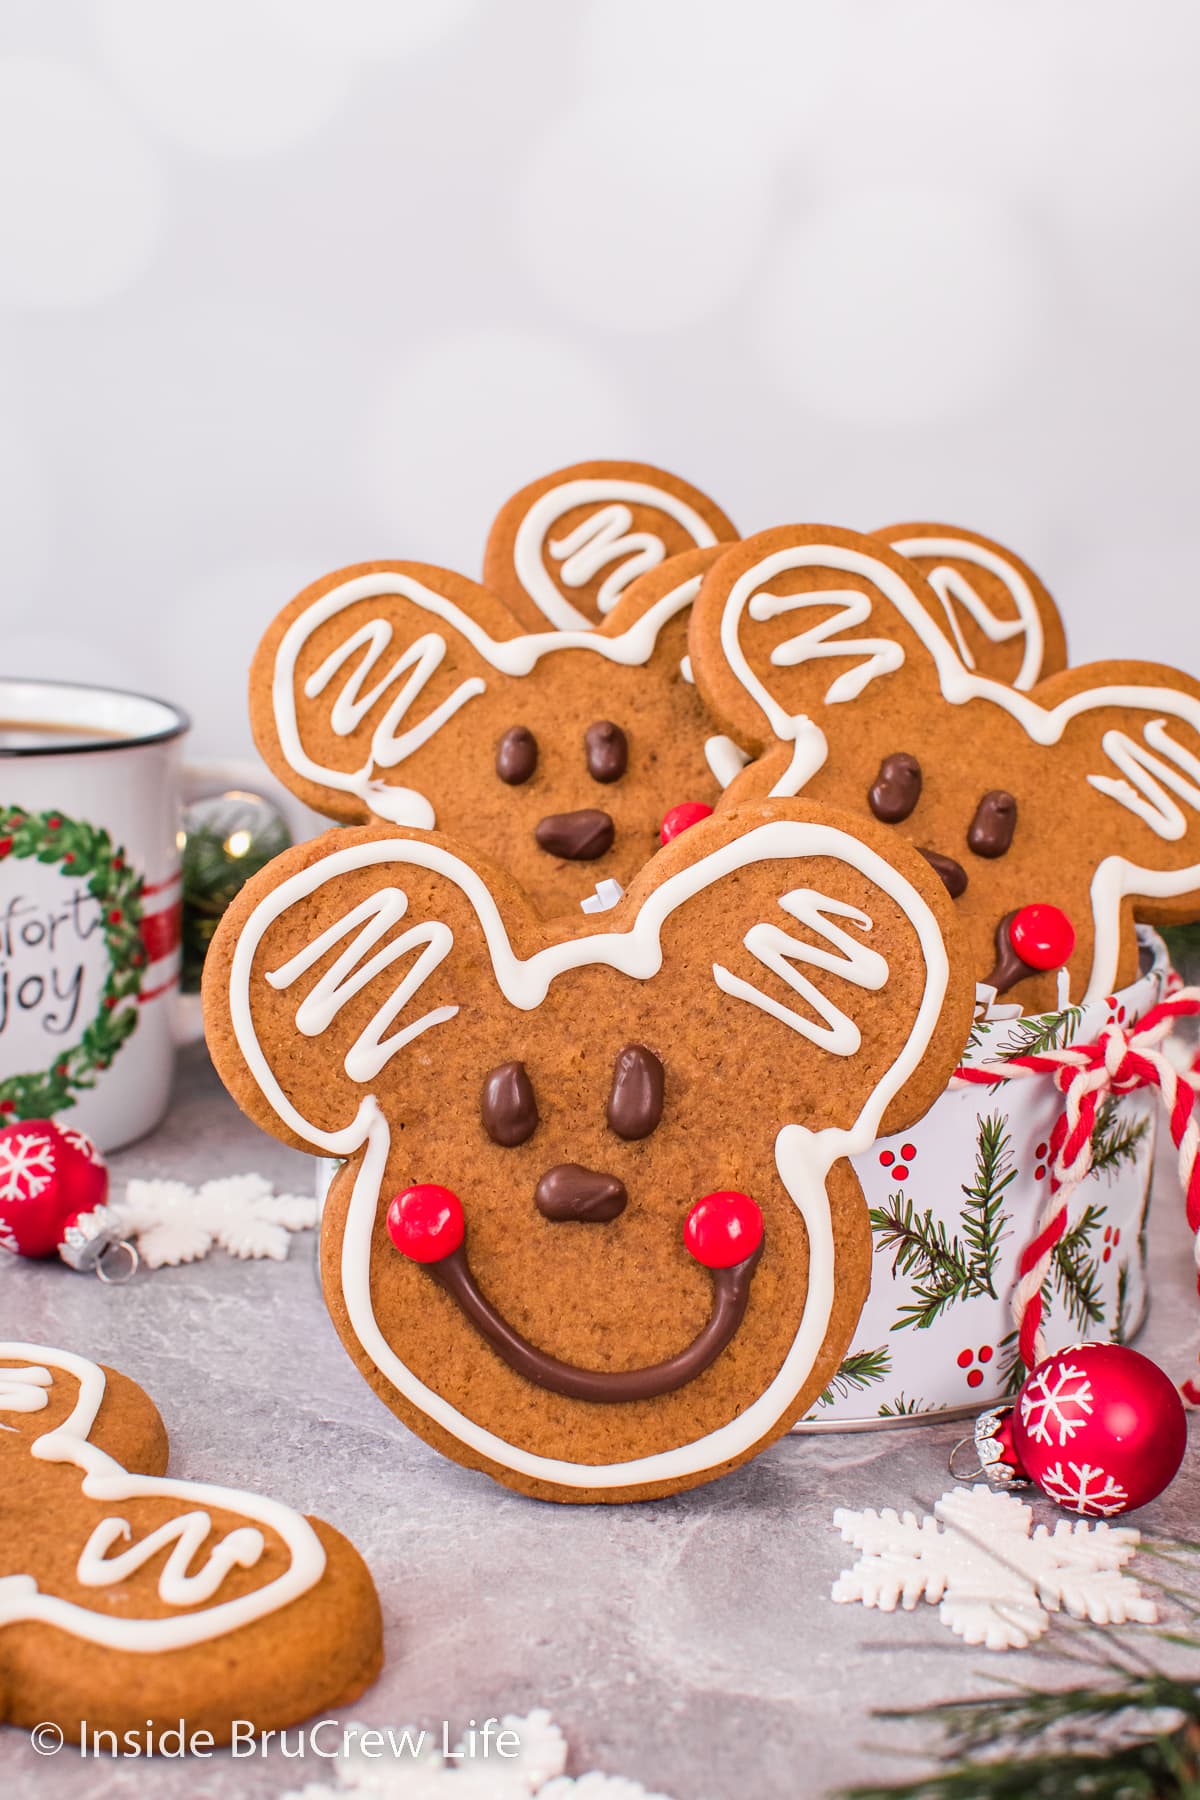 Decorated Mickey Mouse cookies on a tray.